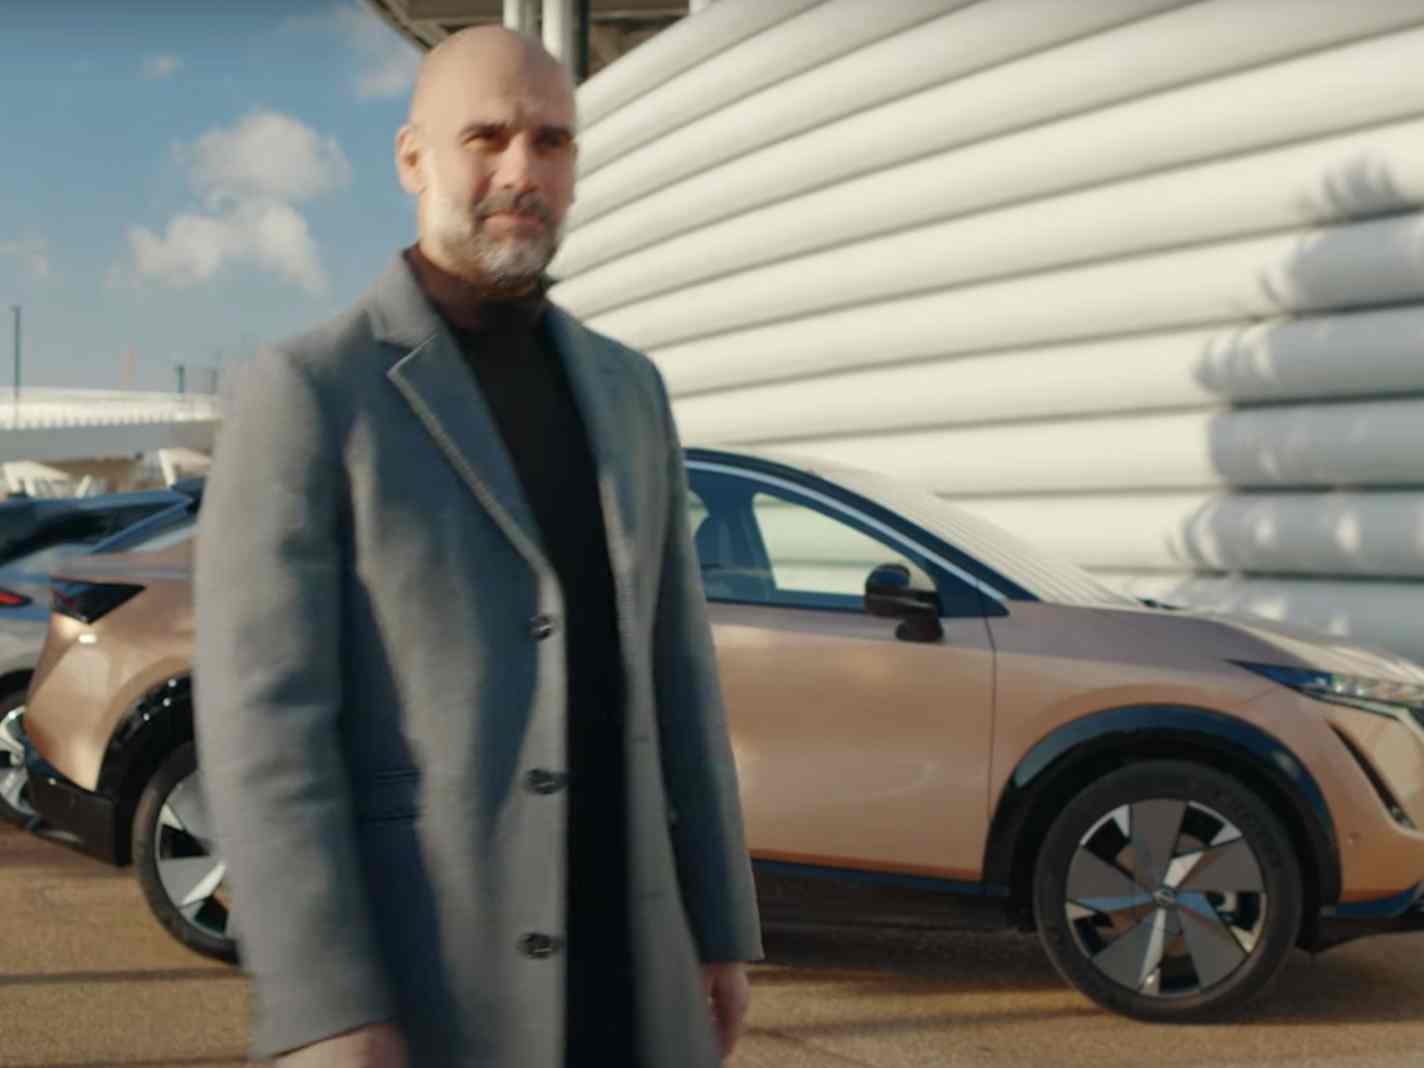 Man City manager Pep Guardiola takes the wheel in a new ad for Nissan